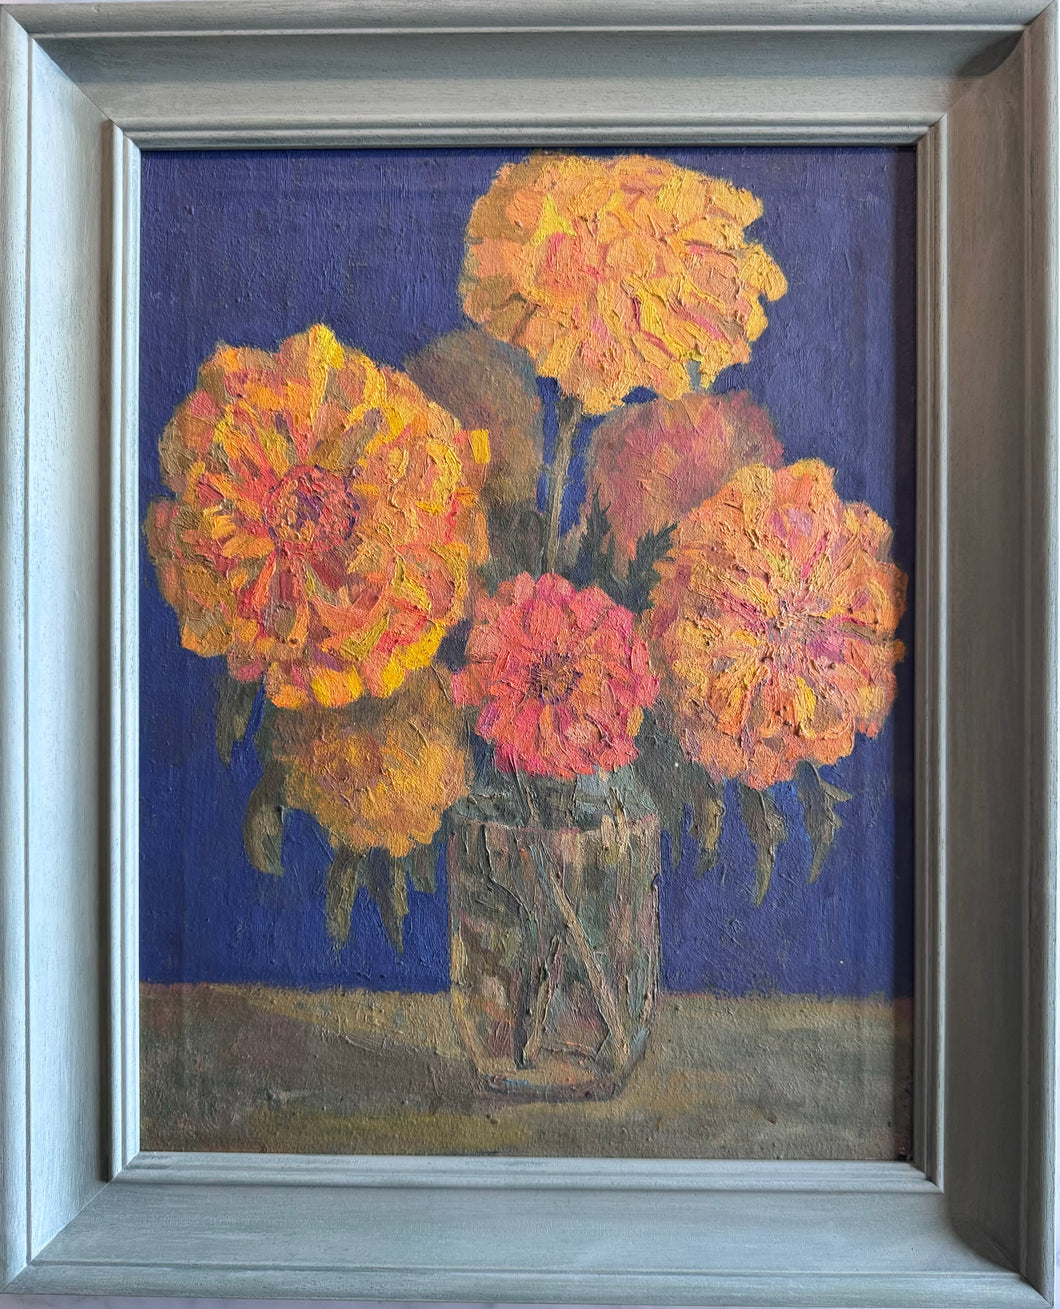 Oil painting on canvas: Yellow flowers in a glass jar